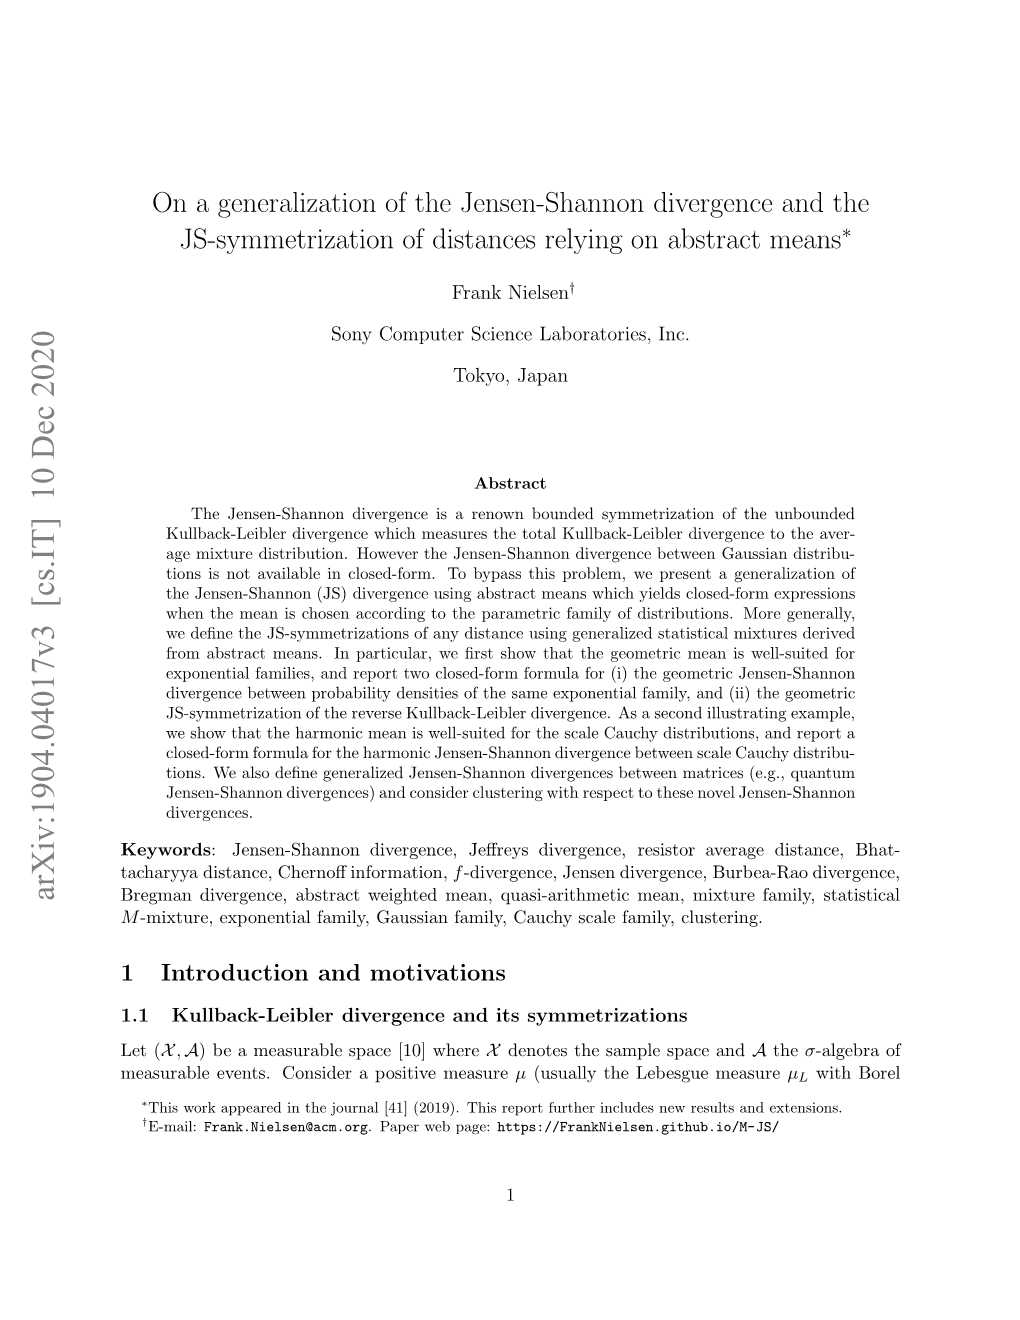 On a Generalization of the Jensen-Shannon Divergence and the Jensen-Shannon Centroid